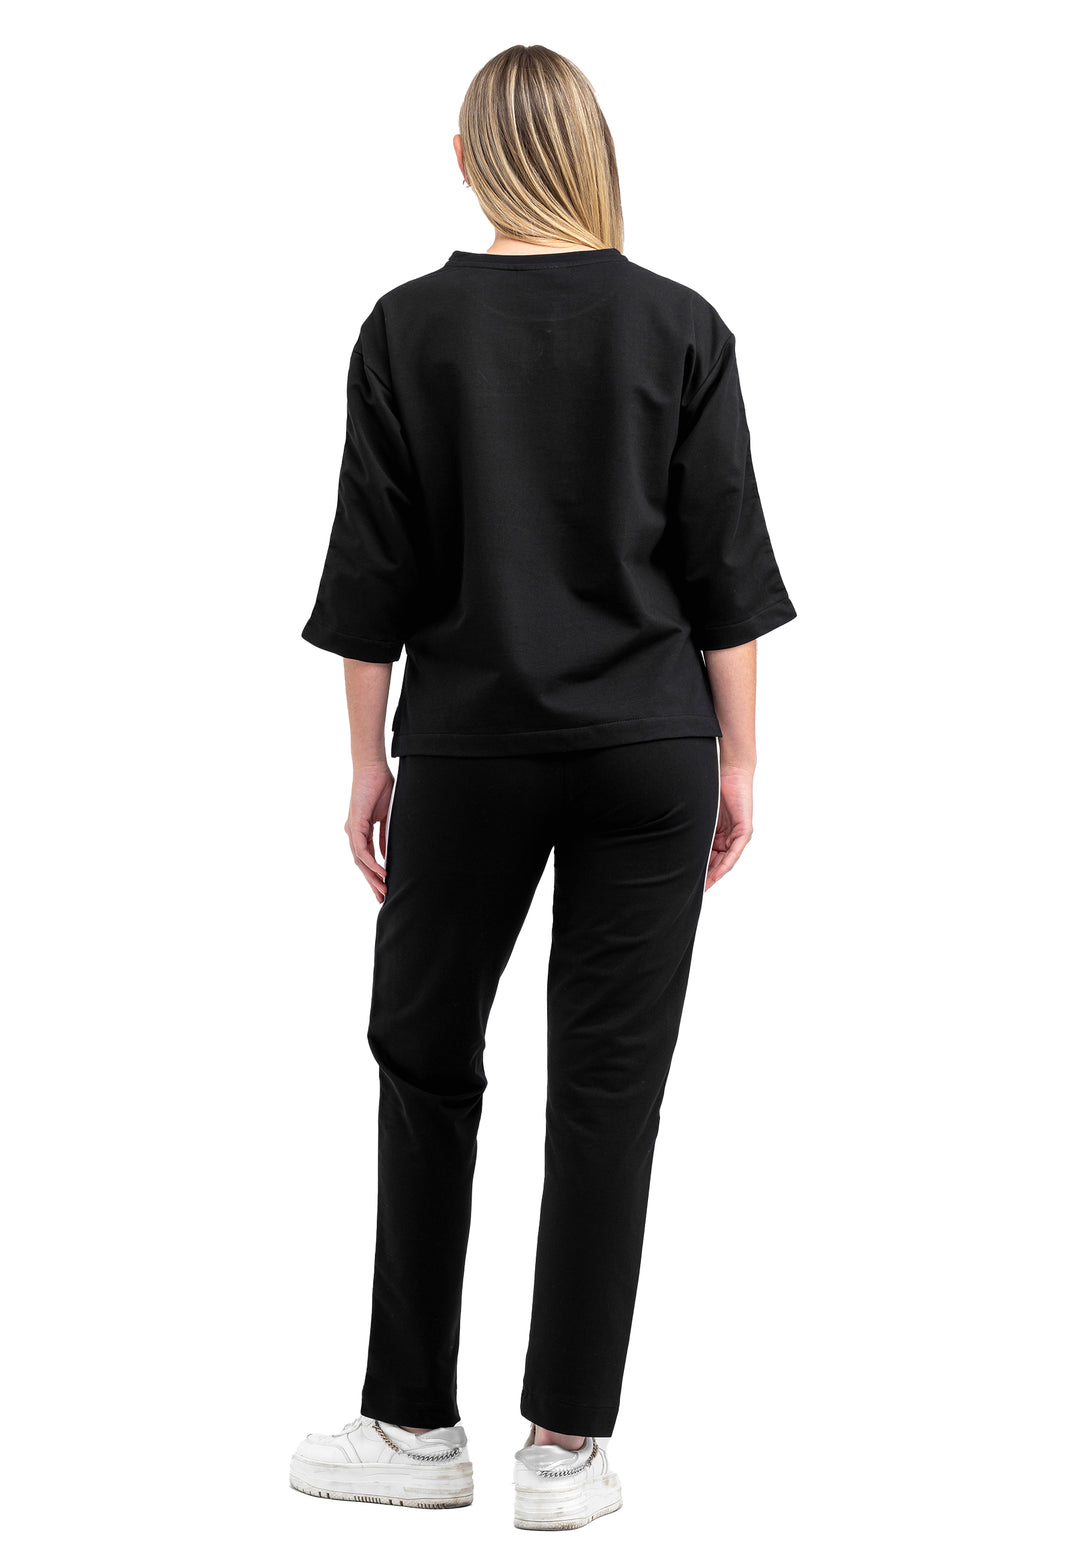 Tom Barron Ladies Half-short sleeve Tracksuit with Embroidery Detailing